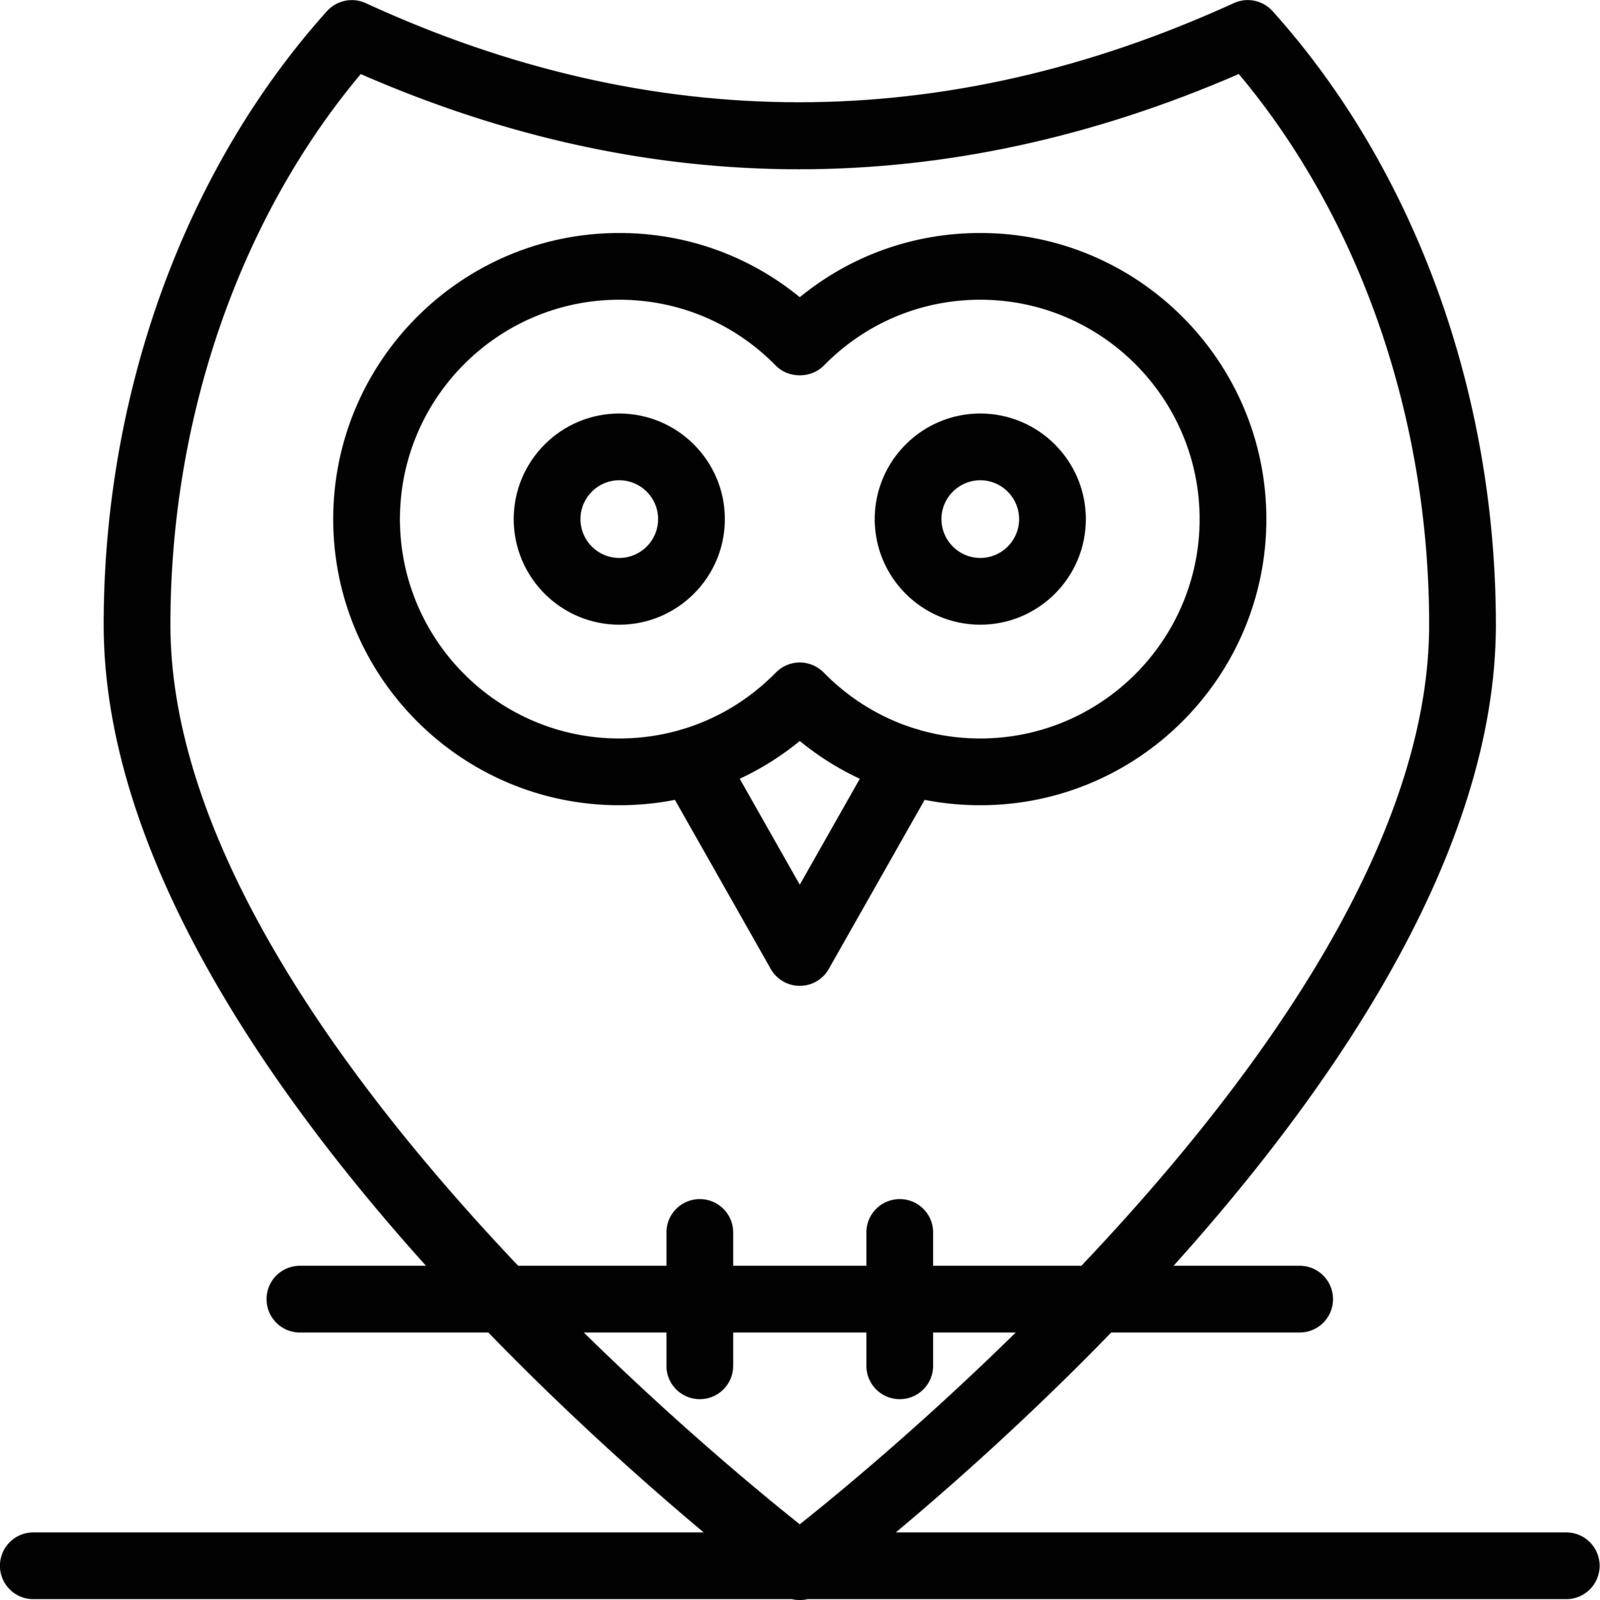 owl Vector illustration on a transparent background. Premium quality symmbols. Thin line vector icons for concept and graphic design.